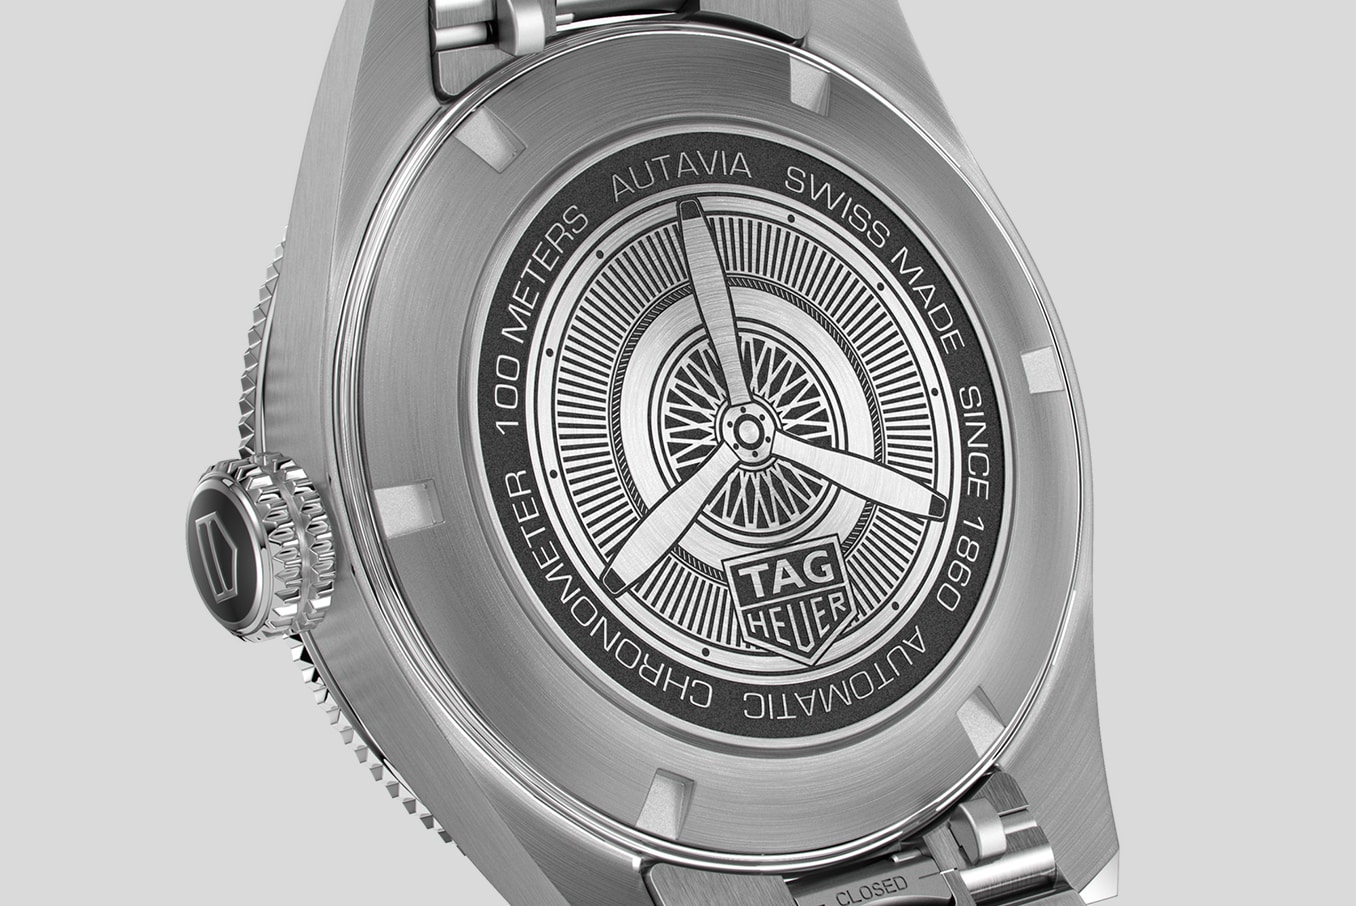  TAG Heuer Autavia Automatic Watch - Diameter 42 mm  WBE5114.EB0173 : Clothing, Shoes & Jewelry